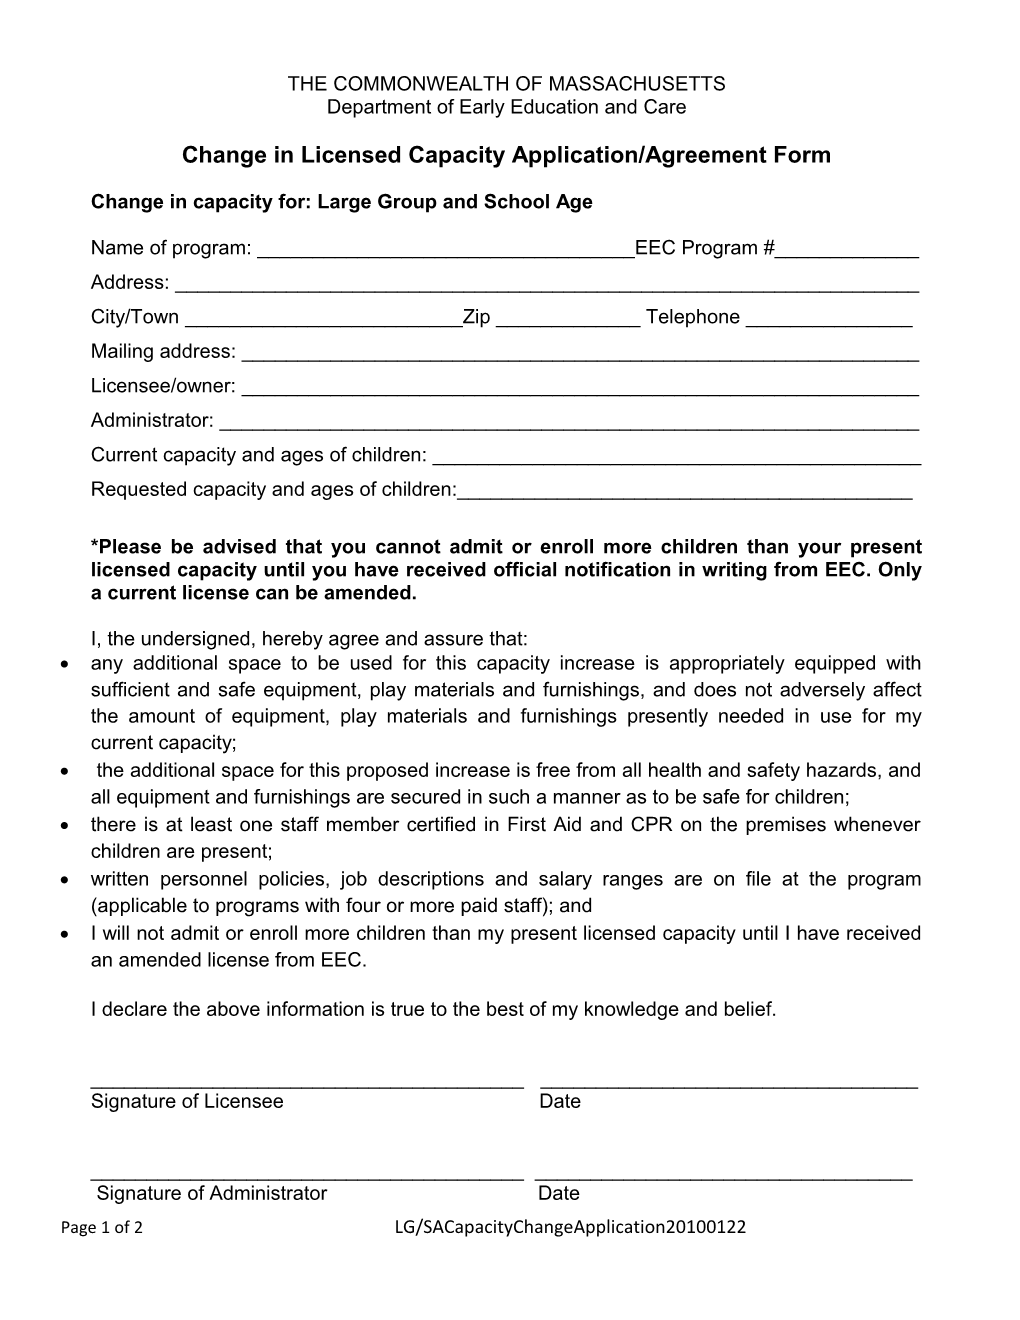 Change in Licensed Capacity Application/Agreement Form